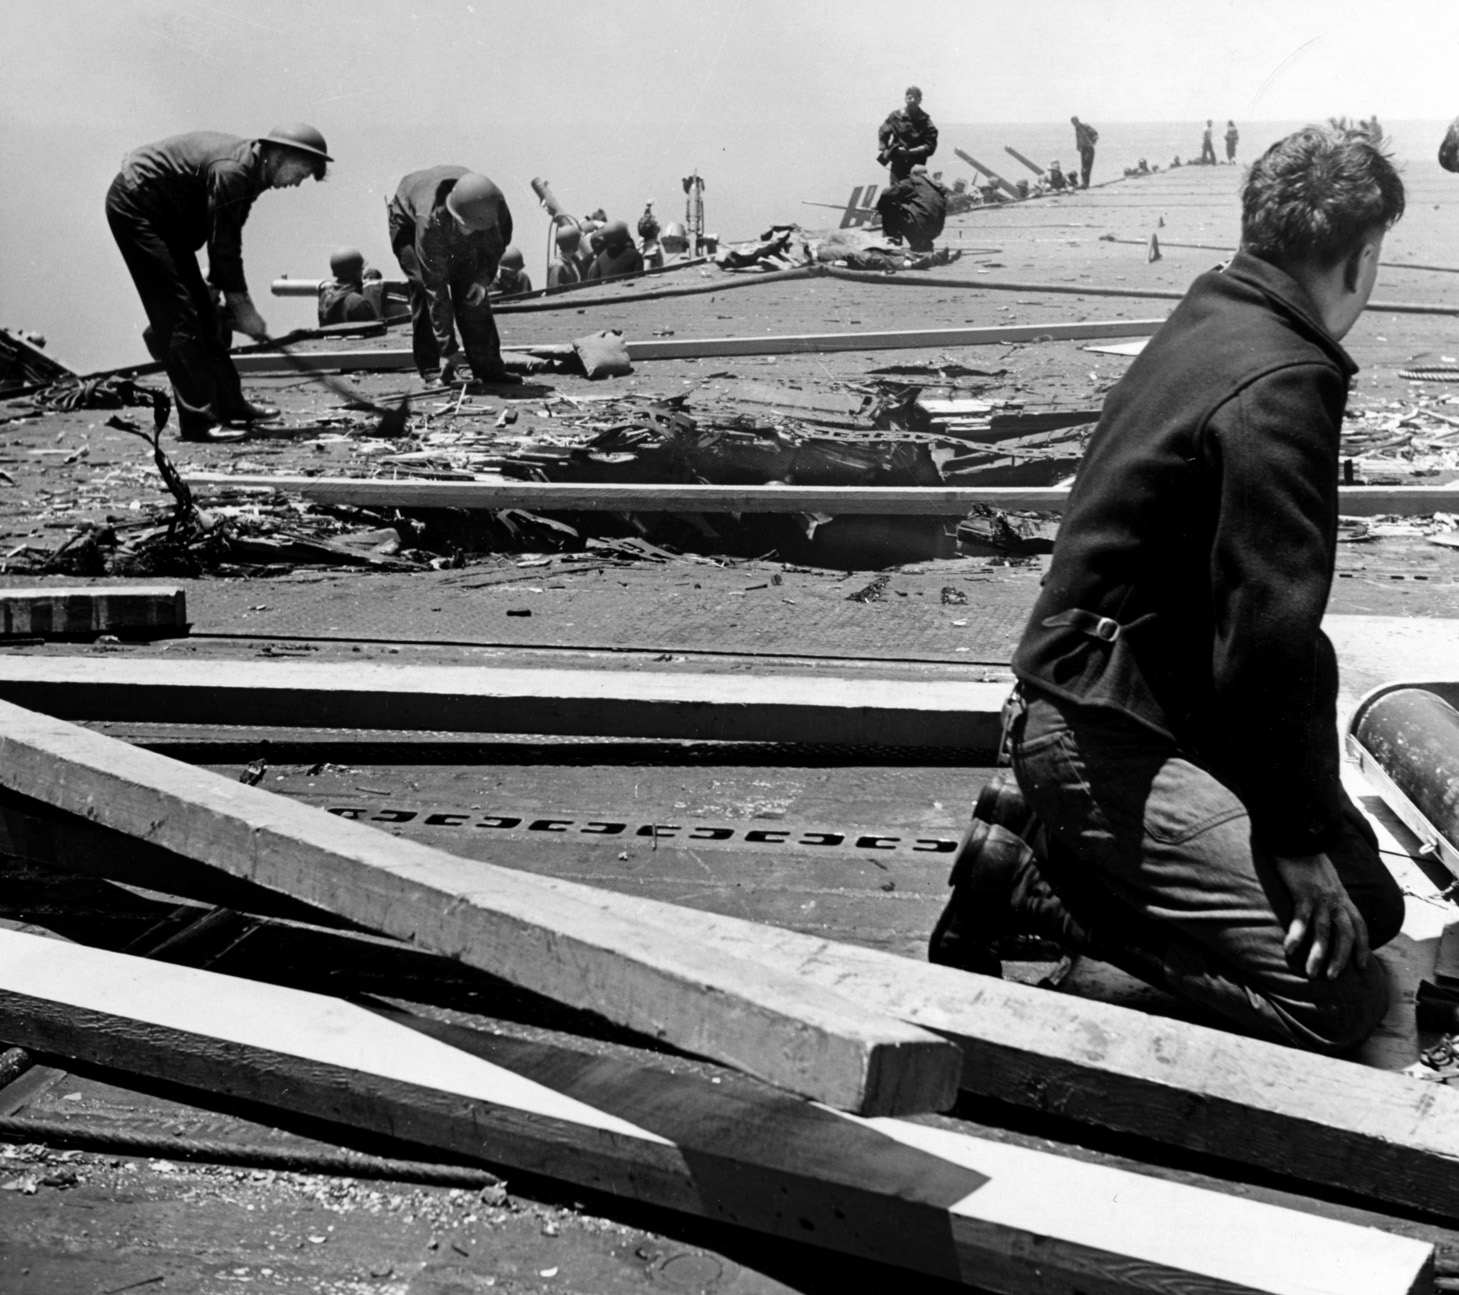 Sailors repair a sizable hole in the flight deck caused by an enemy bomb after the initial Japanese strike on the Yorktown. The bomb caused numerous casualties, while another temporarily caused the carrier to lose power. The deck was repaired, and flight operations resumed, but a second raid later in the day resulted in torpedo damage. As the battle neared its end, Yorktown was sunk after being torpedoed by a Japanese submarine.